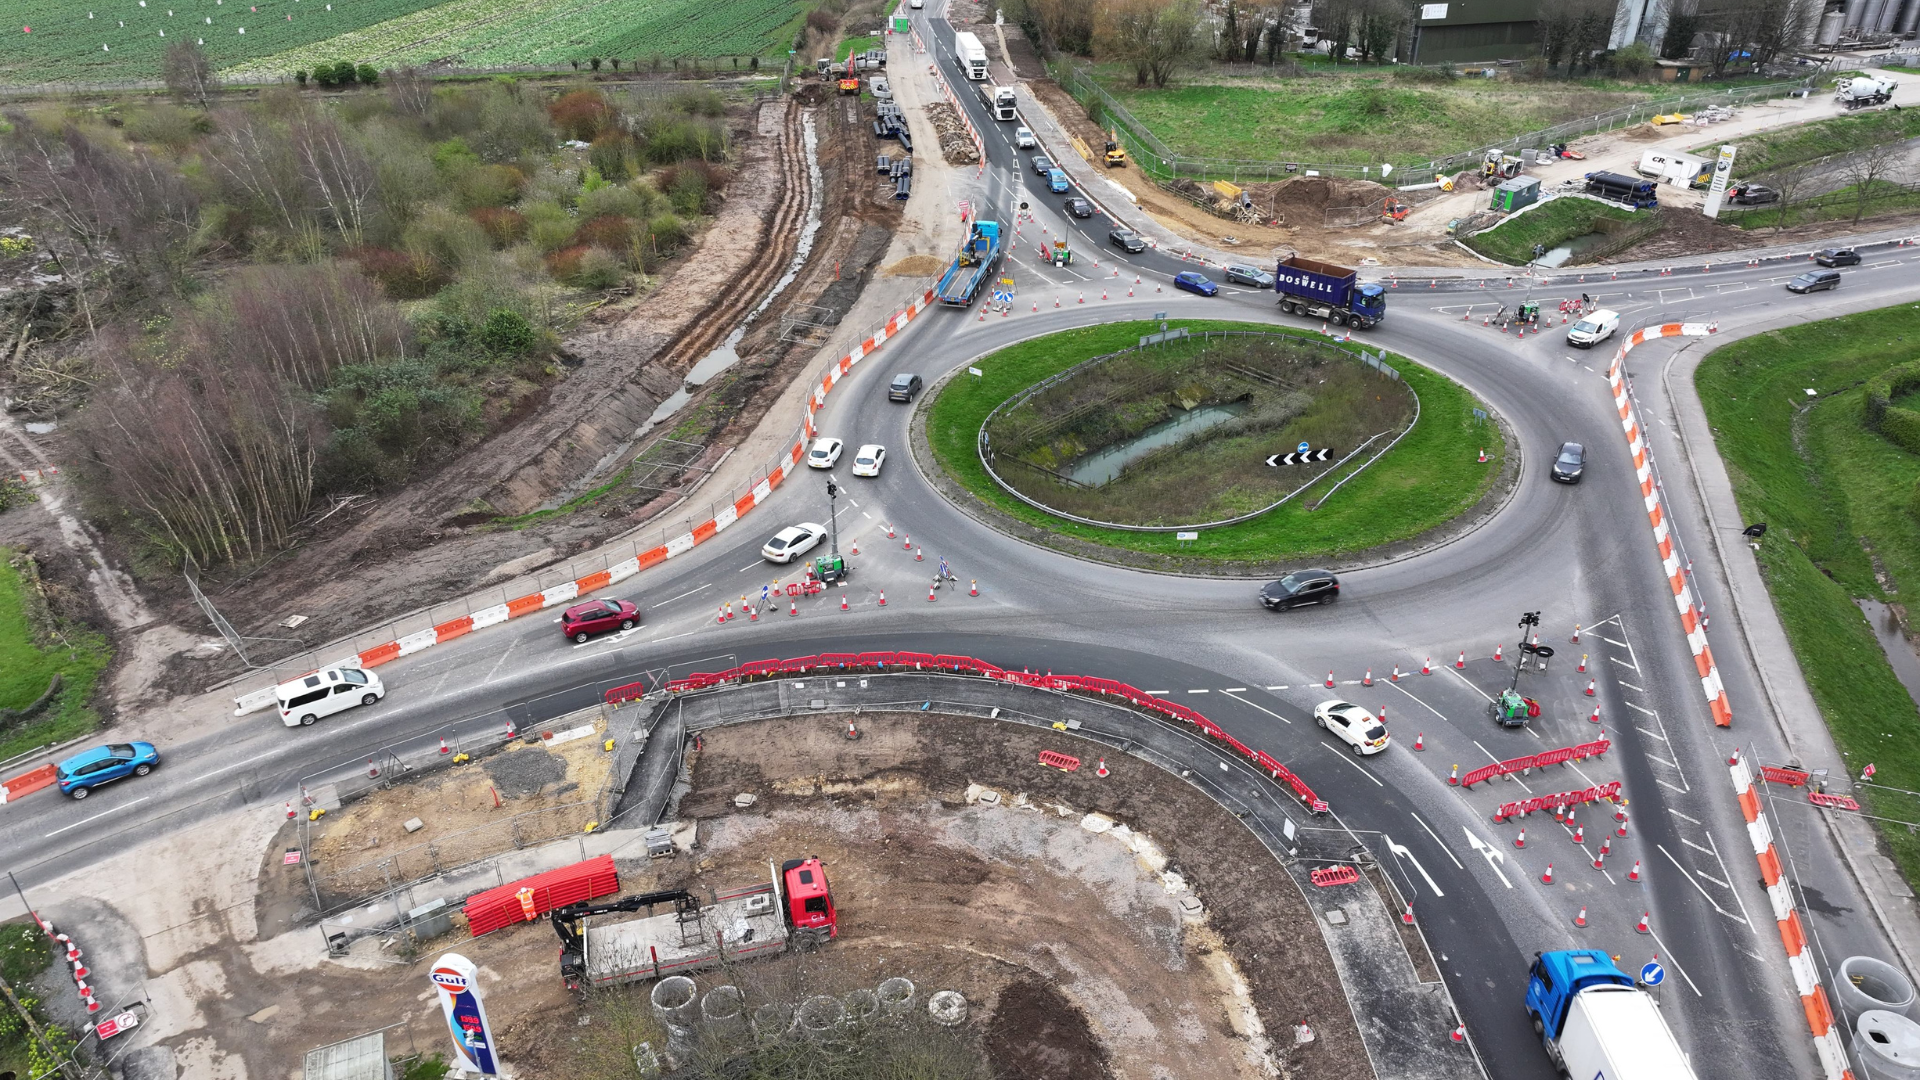 A bird's eye view of the roundabout